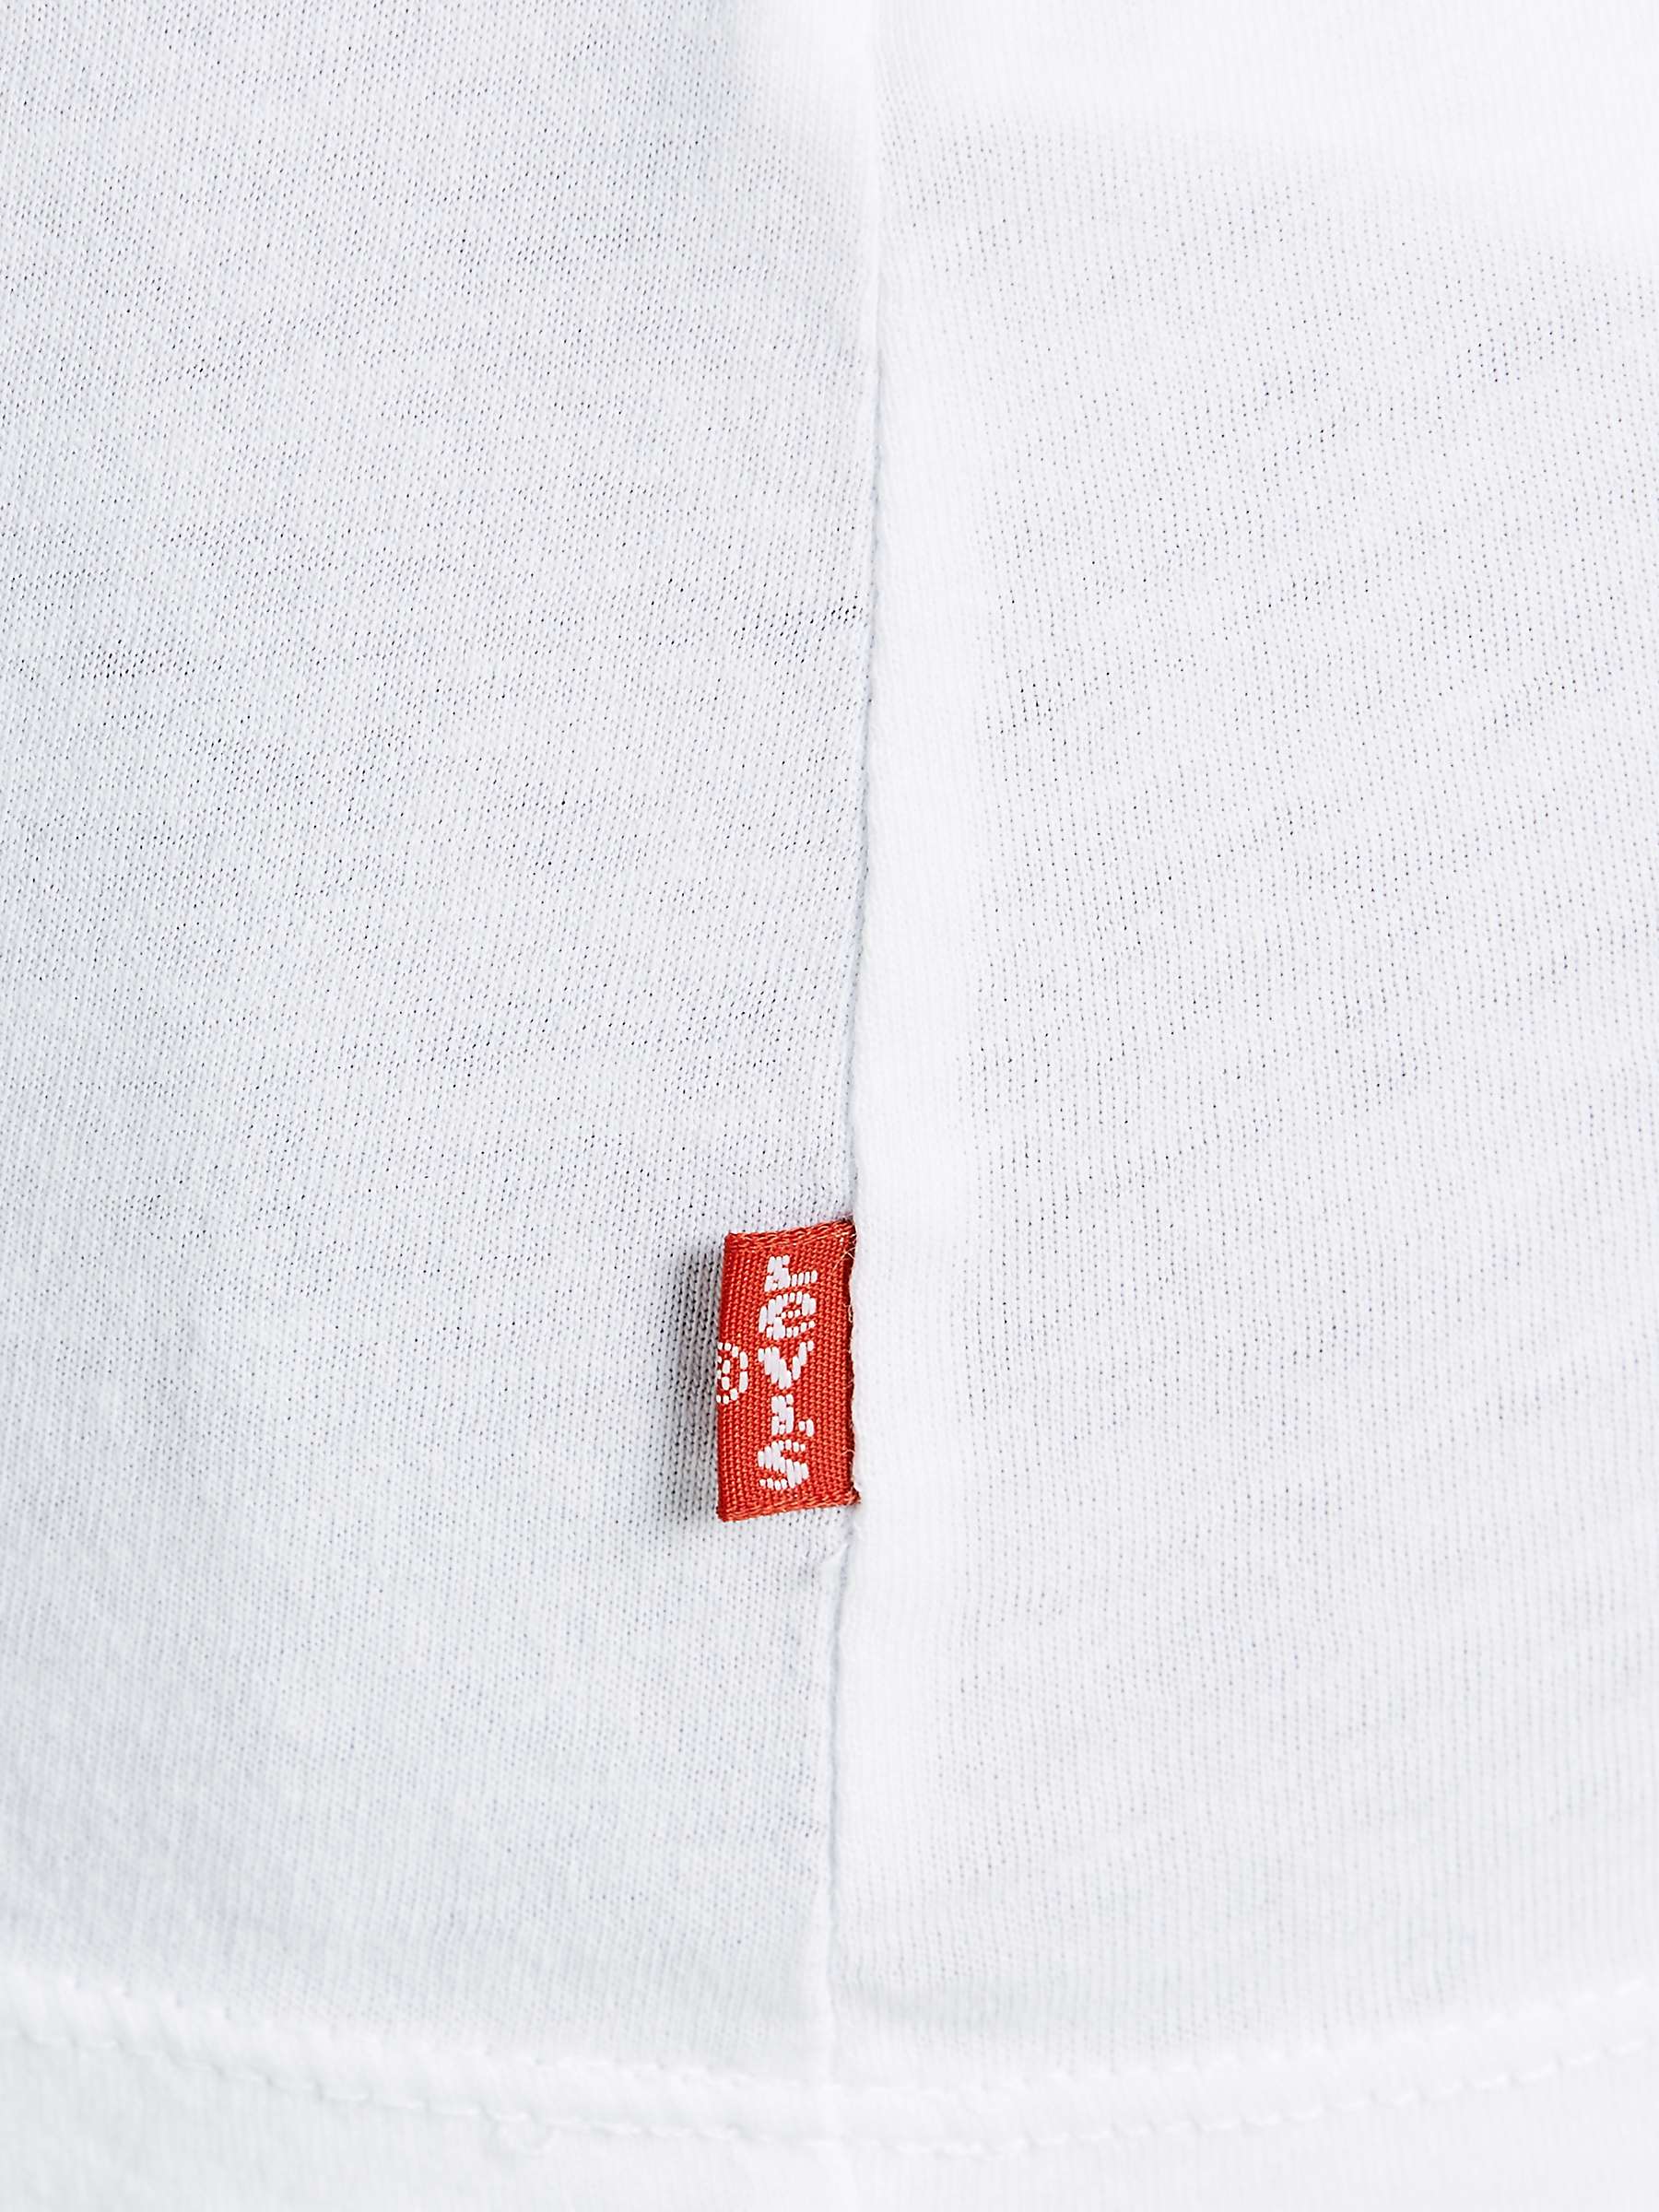 Levi's The Perfect Batwing Logo T-Shirt, White/Red at John Lewis & Partners